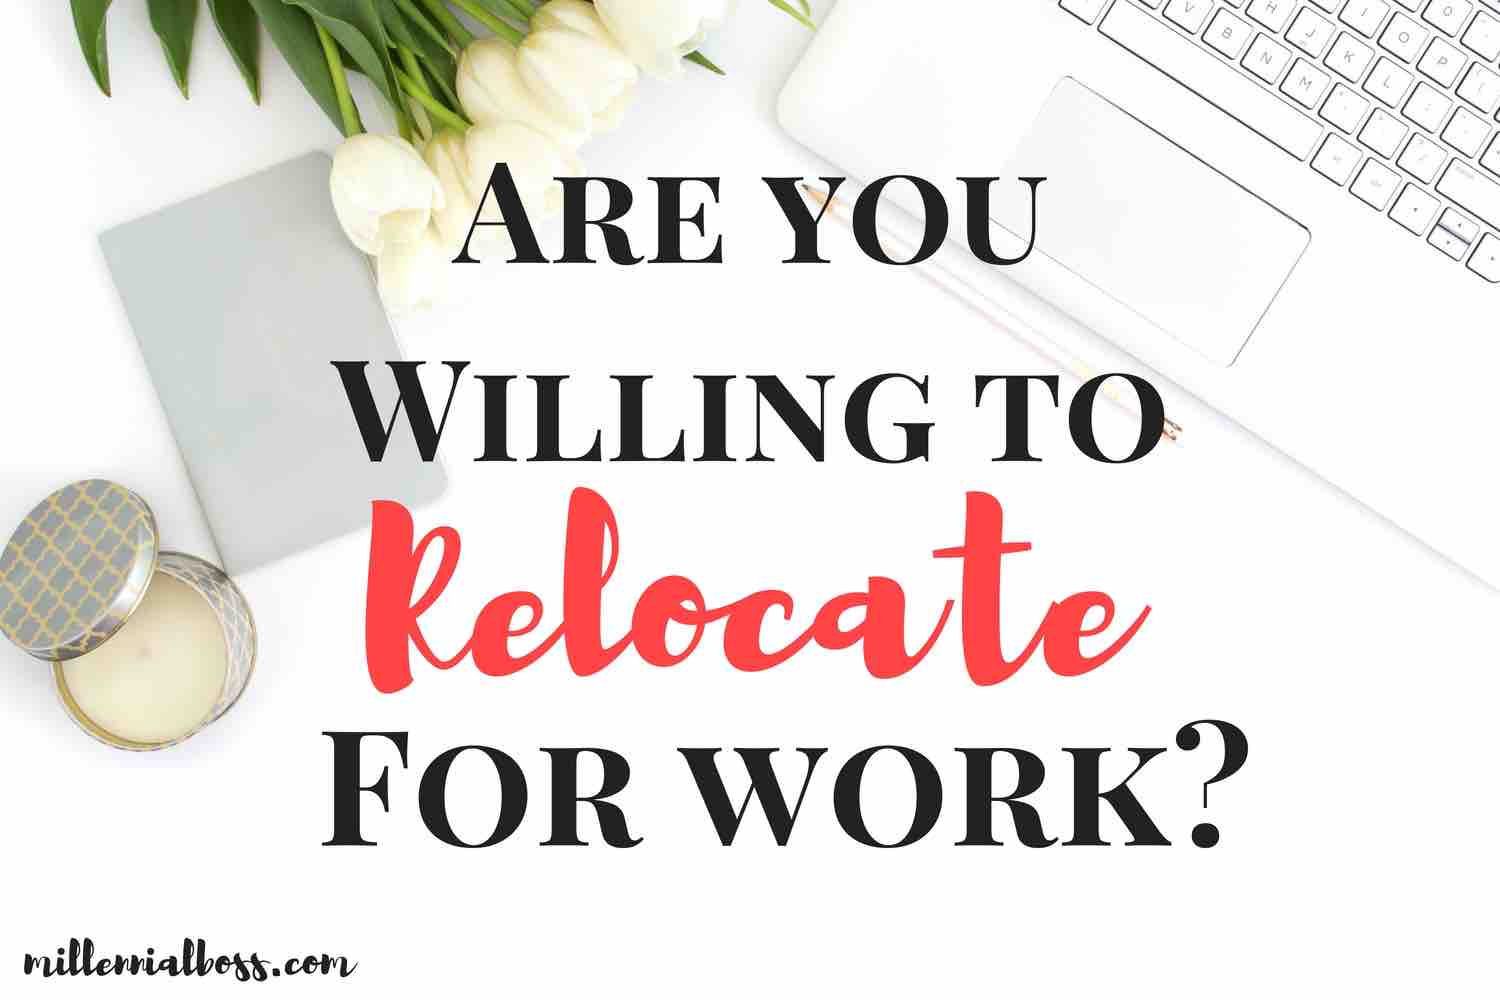 Things to Consider When Relocating For A Job